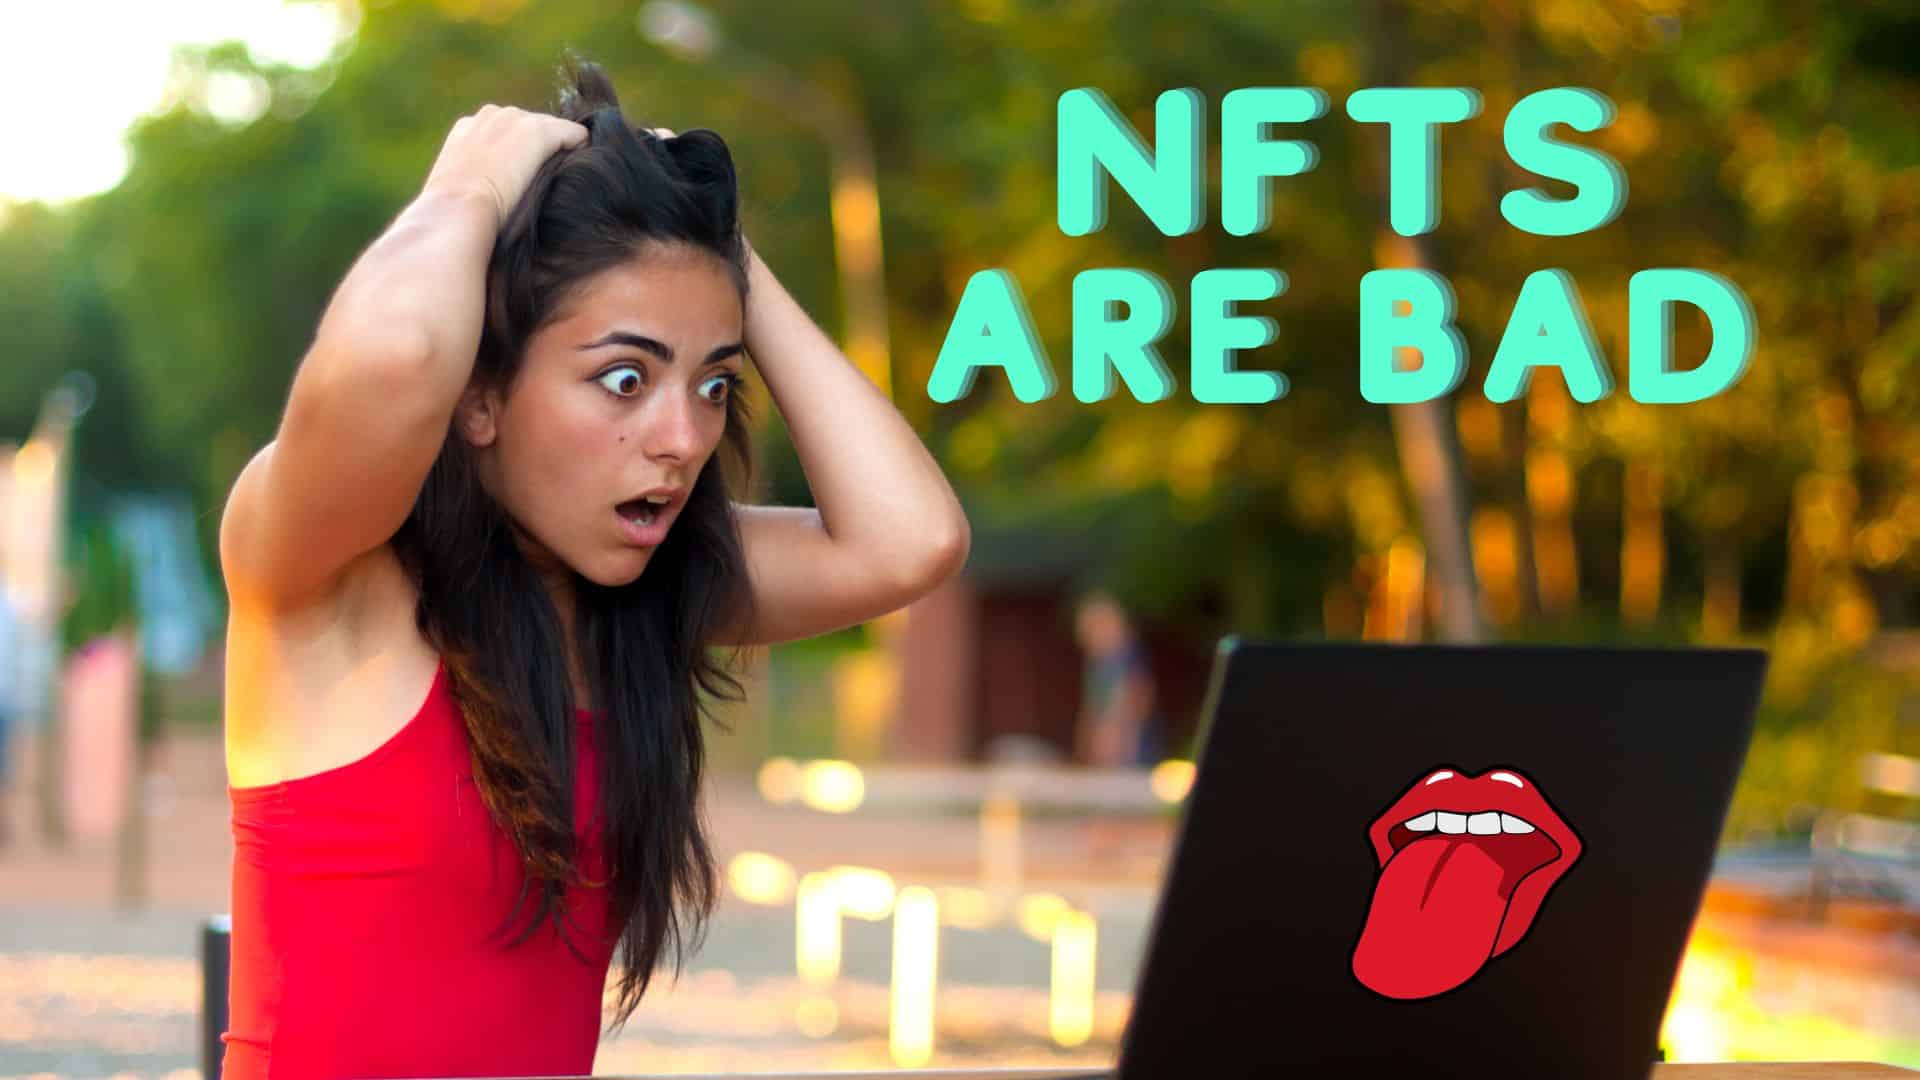 NFTs are bad